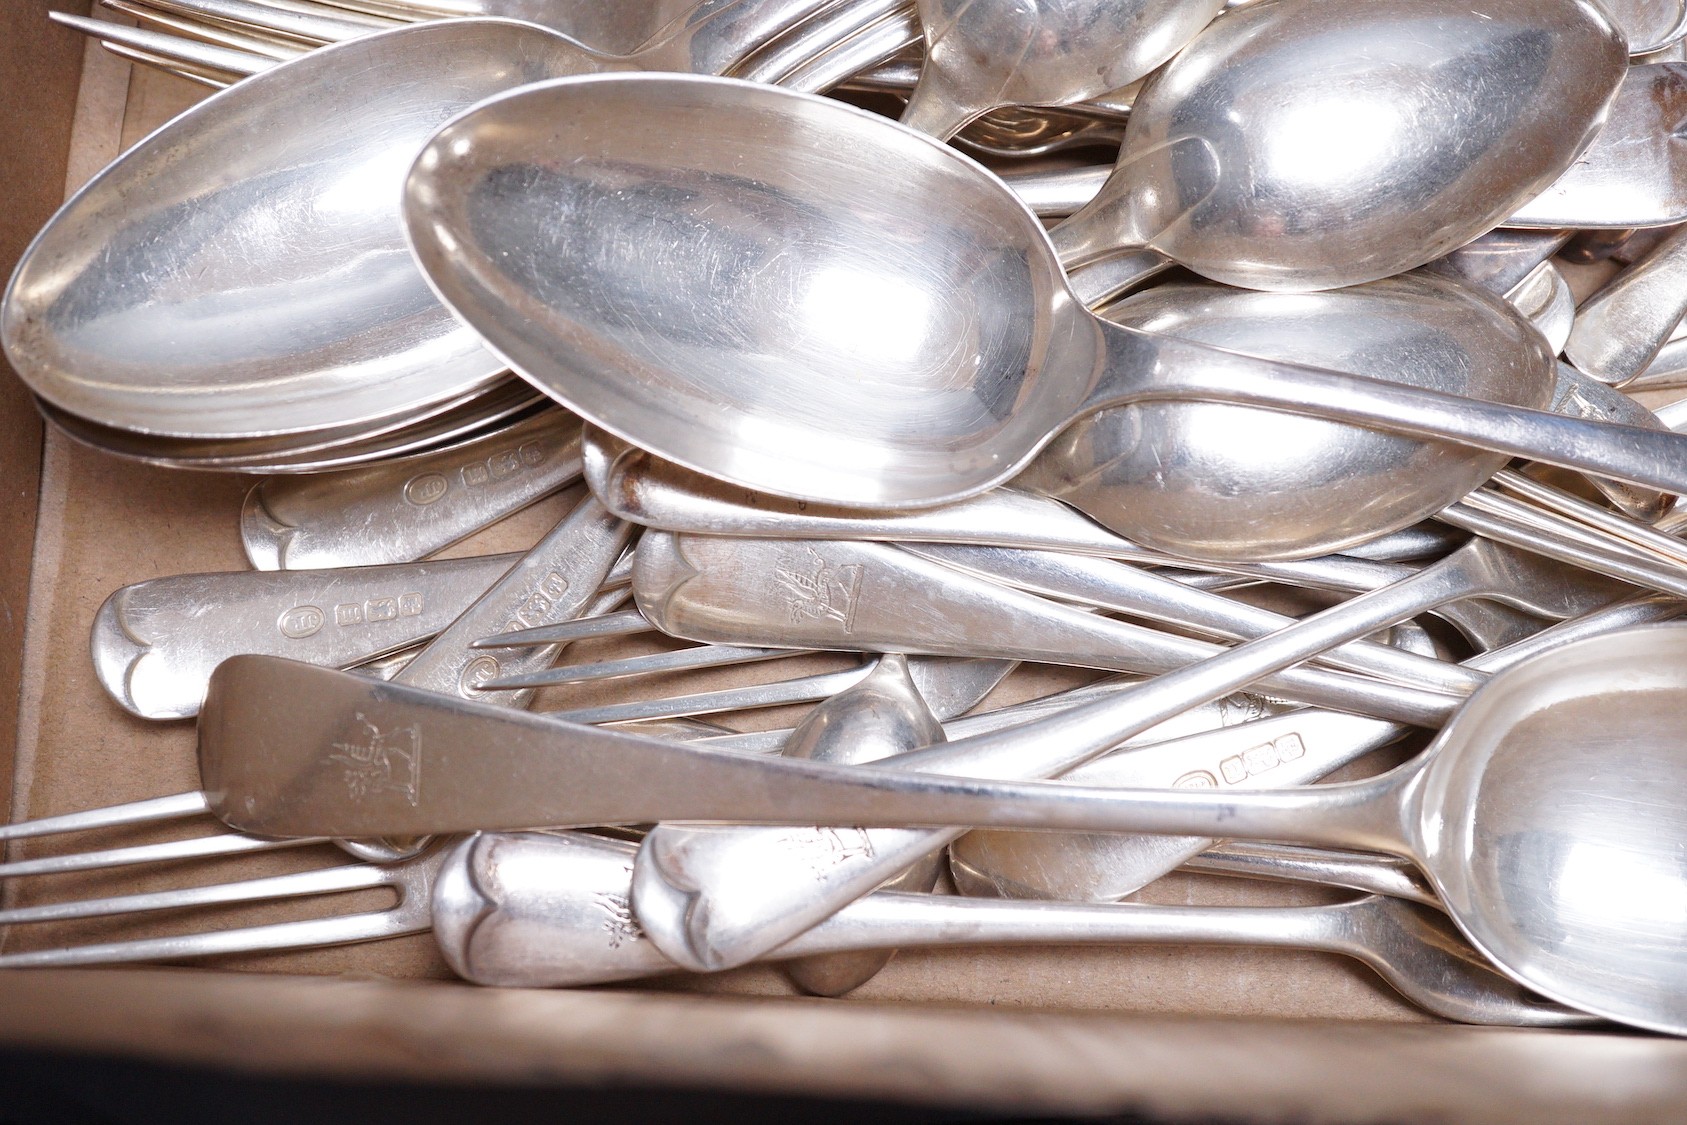 Forty five items of Edwardian silver Old English pattern flatware by John Round & Sons, Sheffield, 1904, one other silver teaspoons and two plated spoons